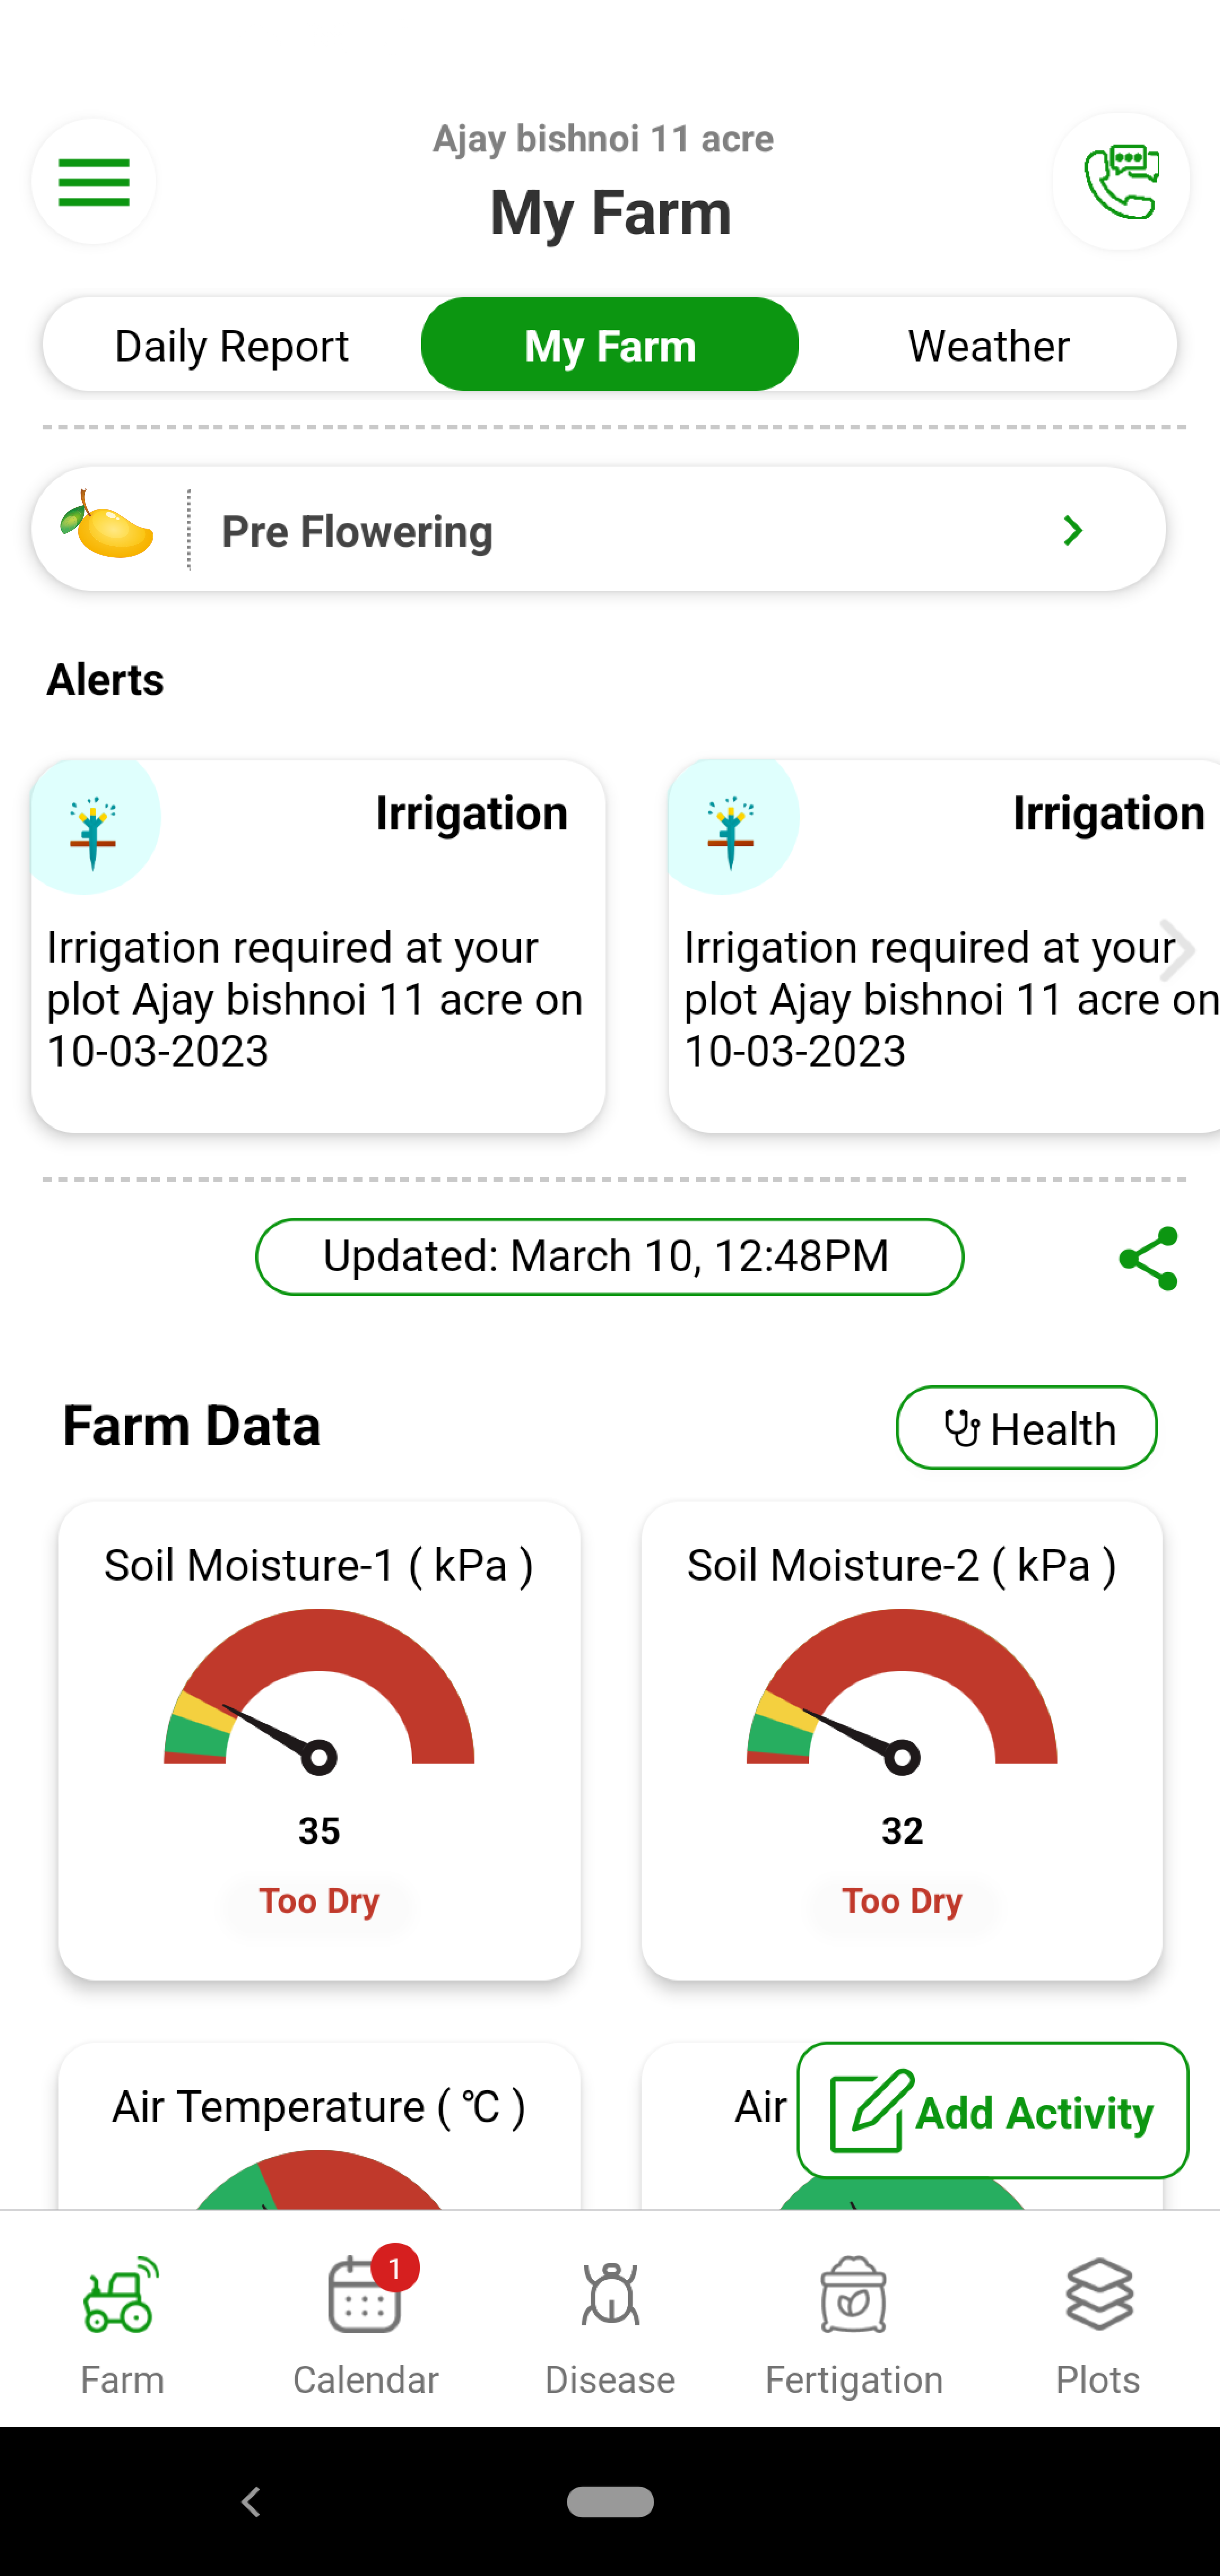 Too much water or too less water can be very harmful for mango. Mango’s water requirements vary based on soil type and stage. With Fyllo’s device containing soil moisture and soil temperature sensor and intelligent software, you get alerts on how much water to provide to the crop. You can also see and visualize evapotranspiration (Etc) values of the crop. You can perfectly manage the water requirements to get the perfect size, color and sugar.